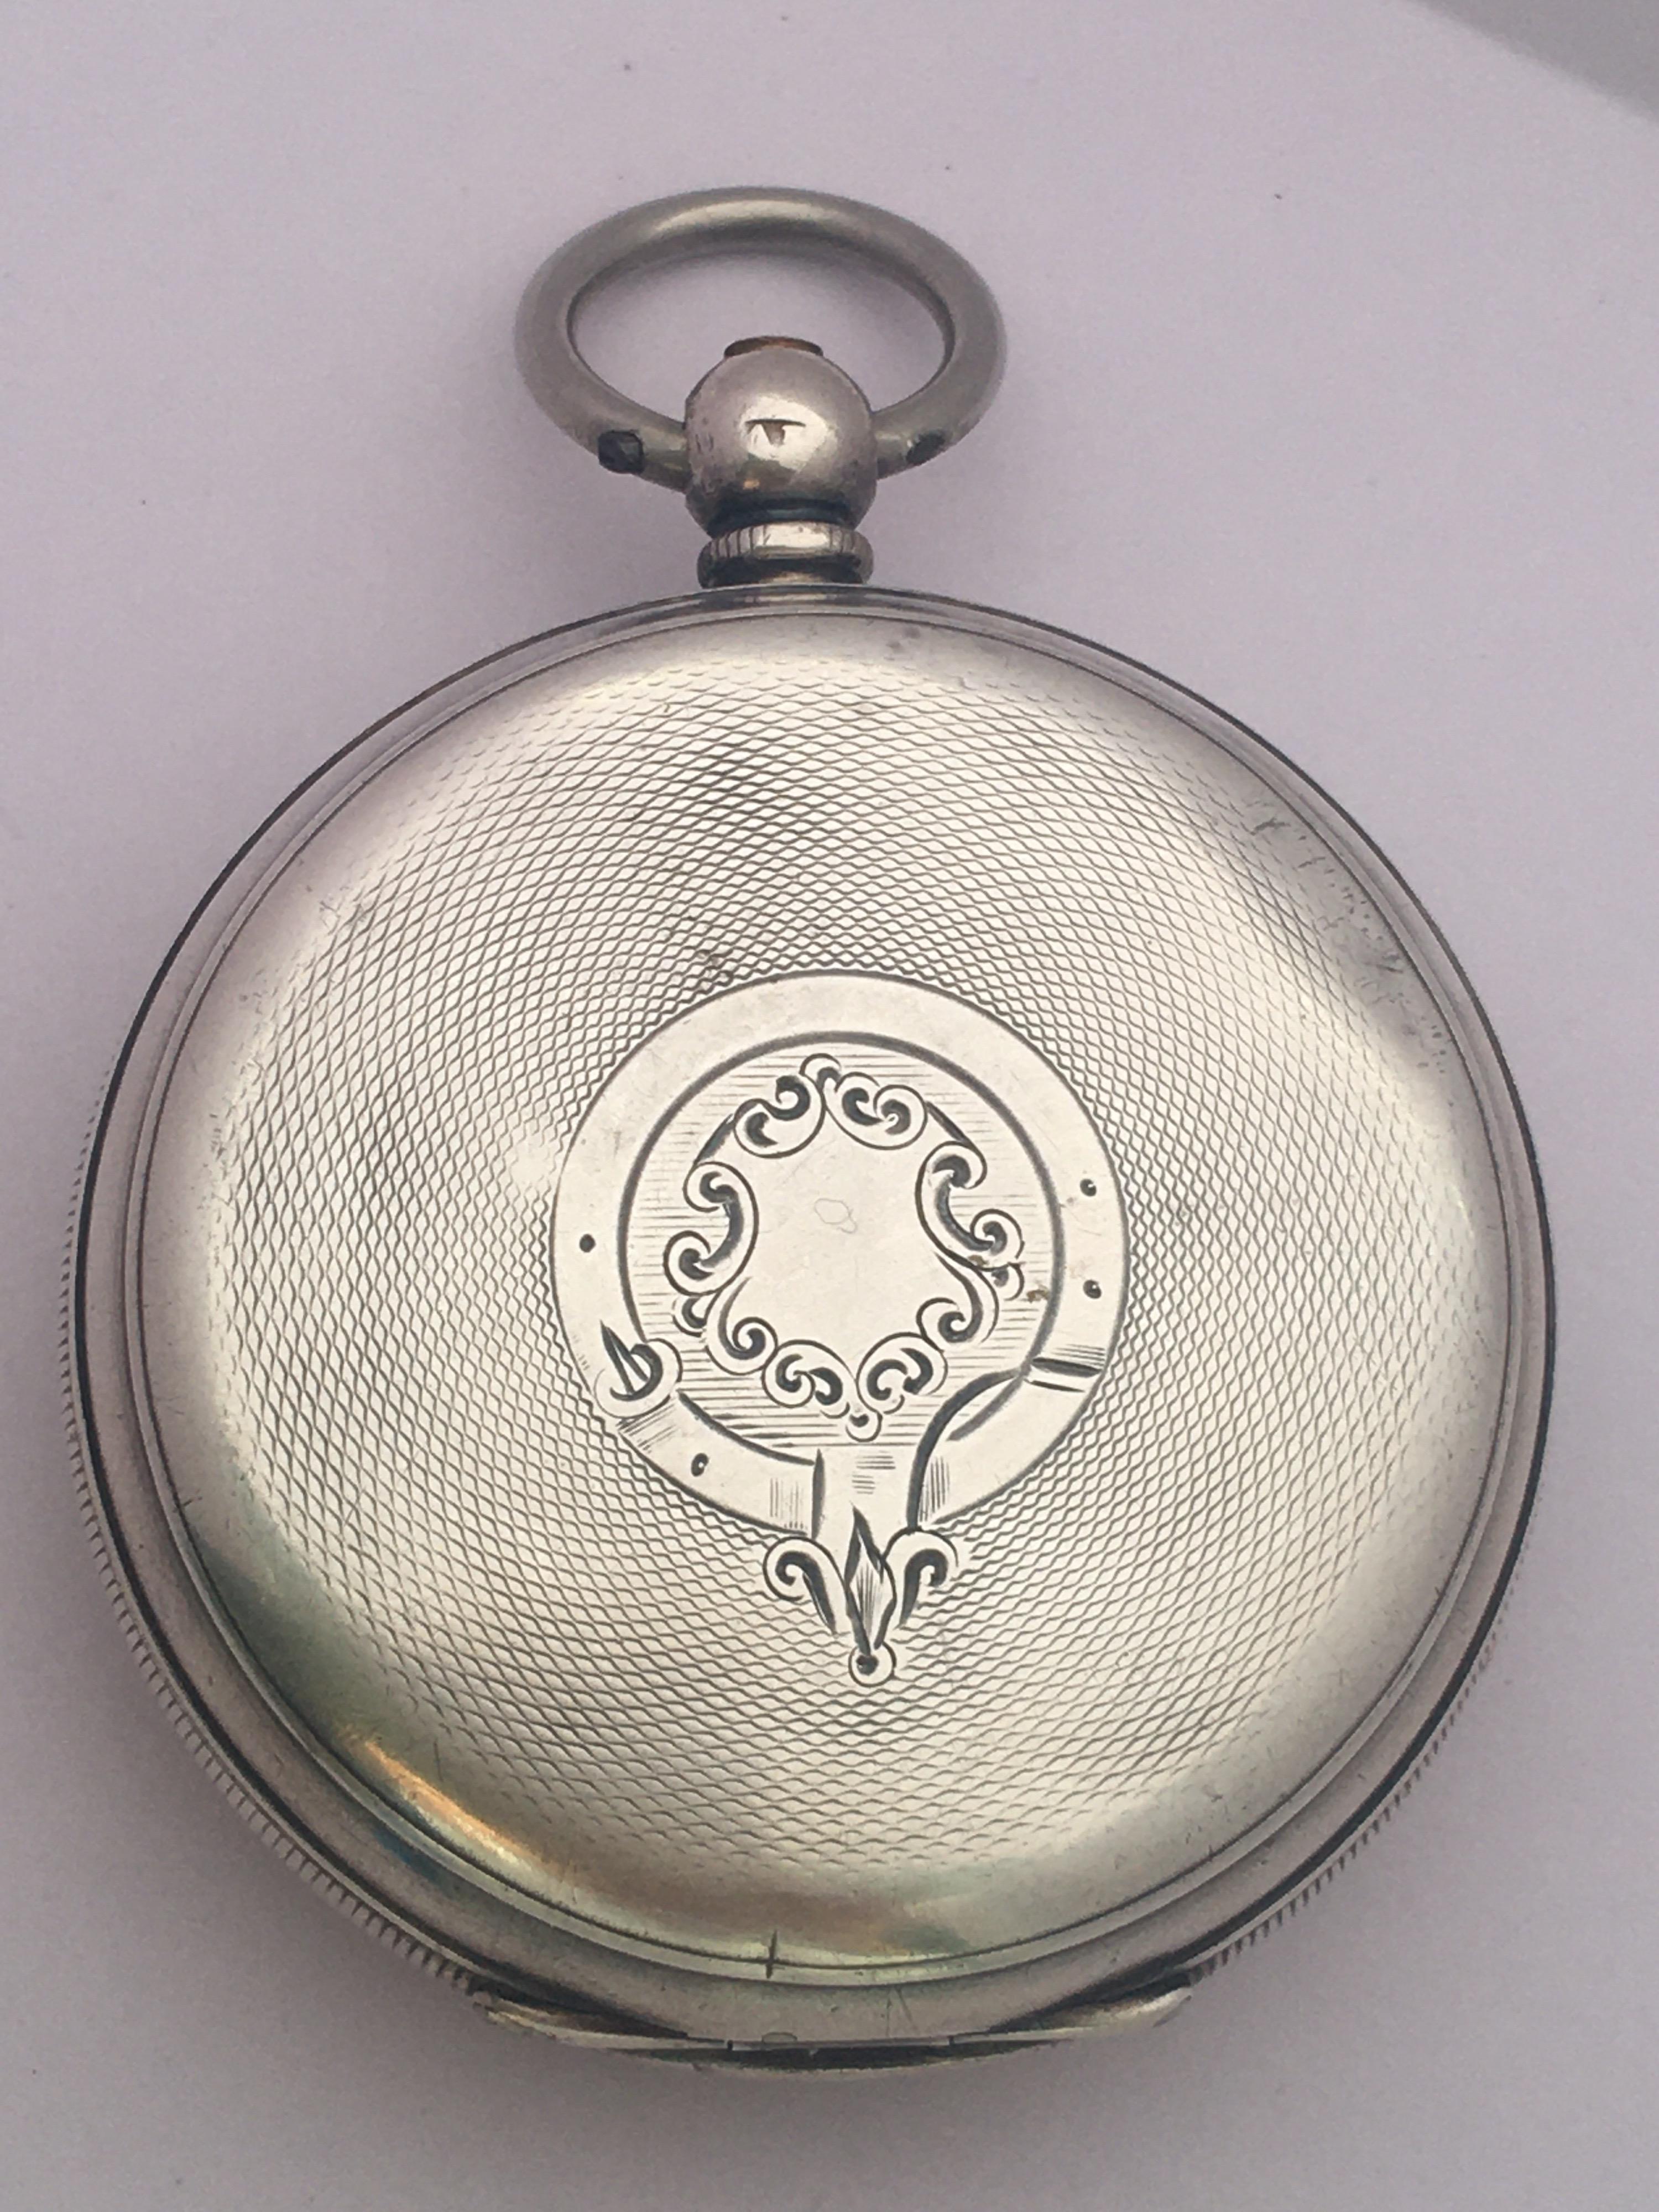 Antique Silver Key Winding Pocket Watch Signed H. E. Peck London For Sale 6